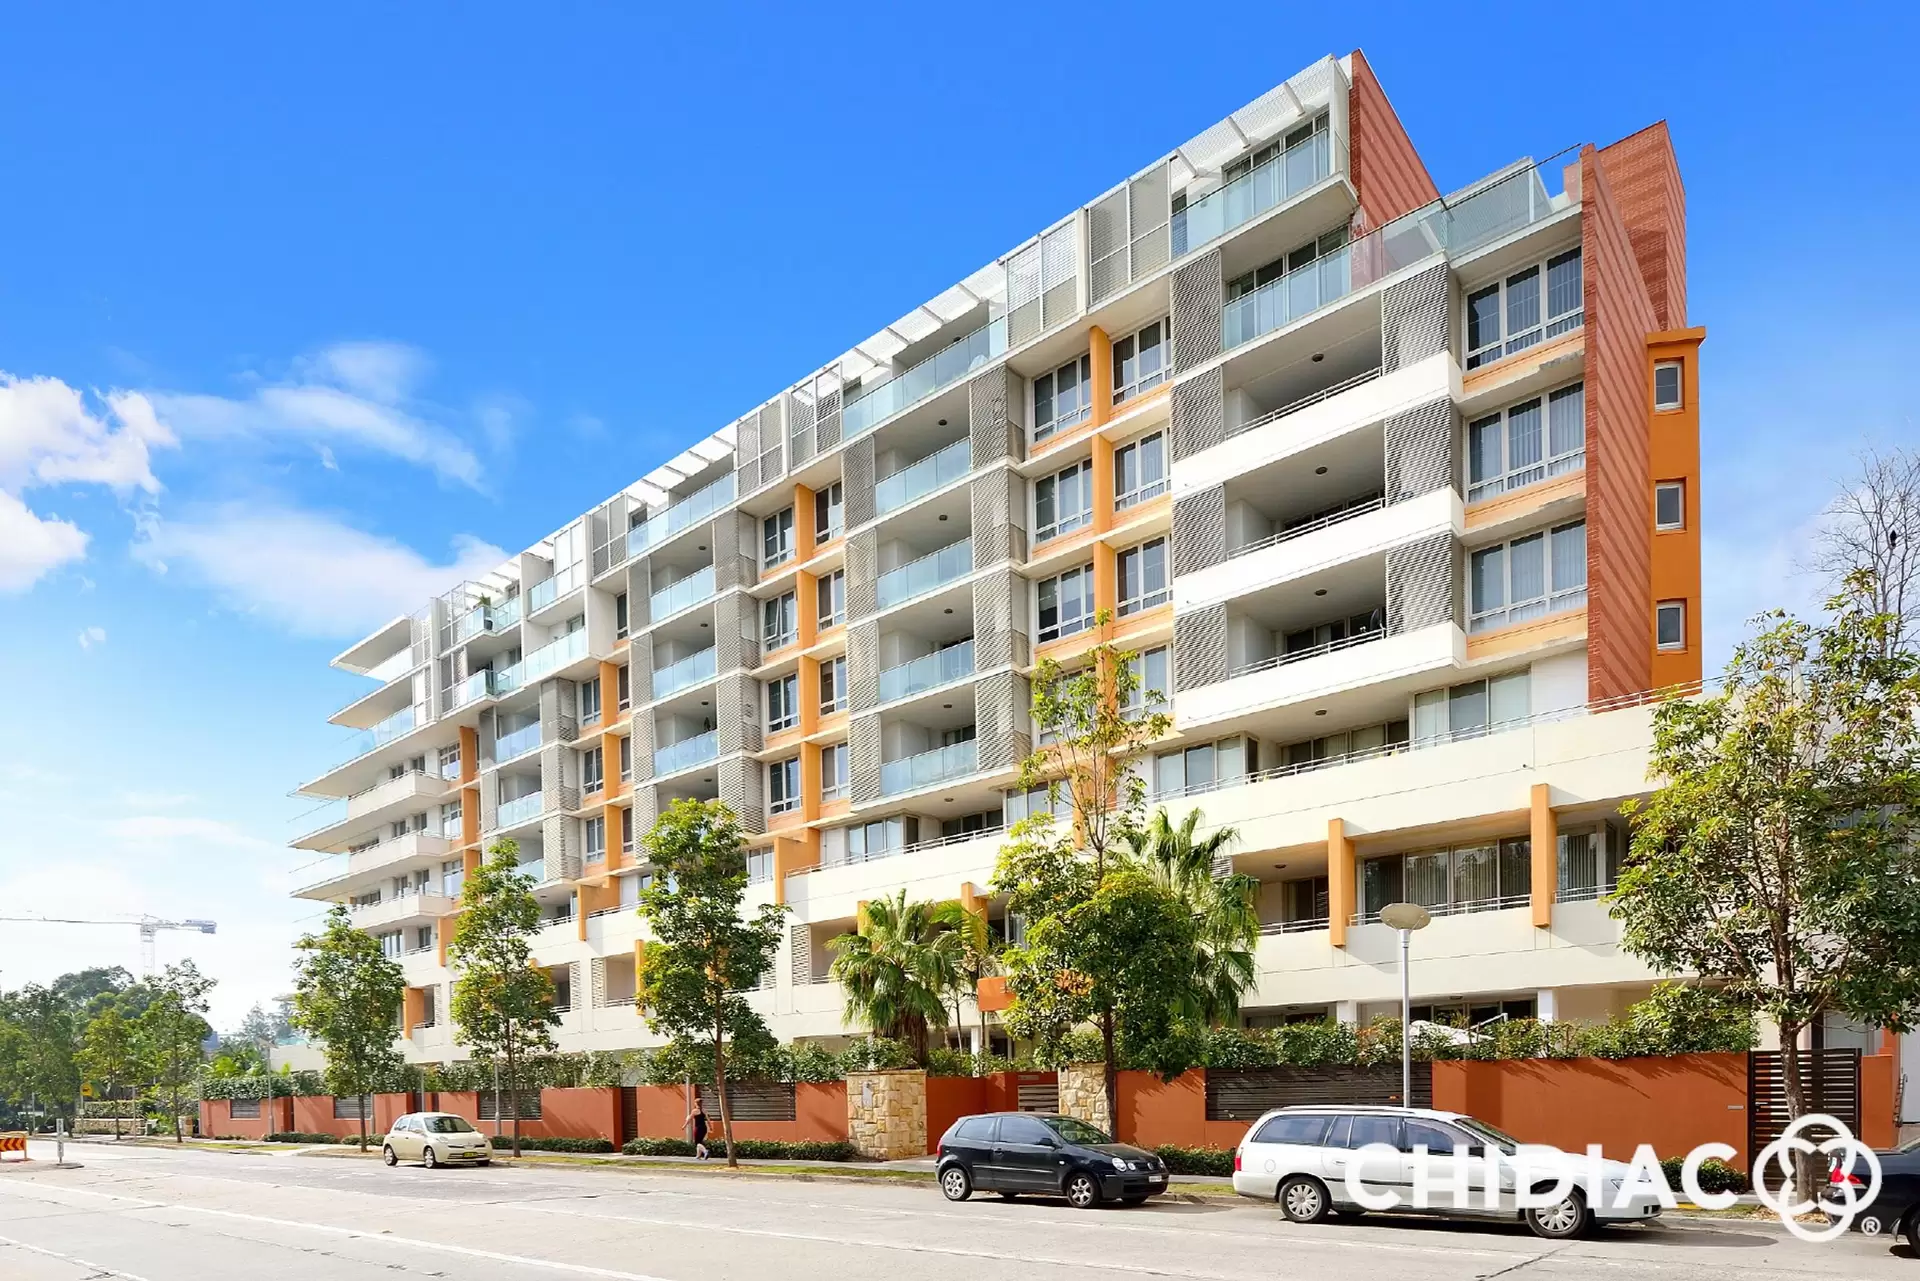 504/9 Baywater Drive, Wentworth Point Leased by Chidiac Realty - image 1